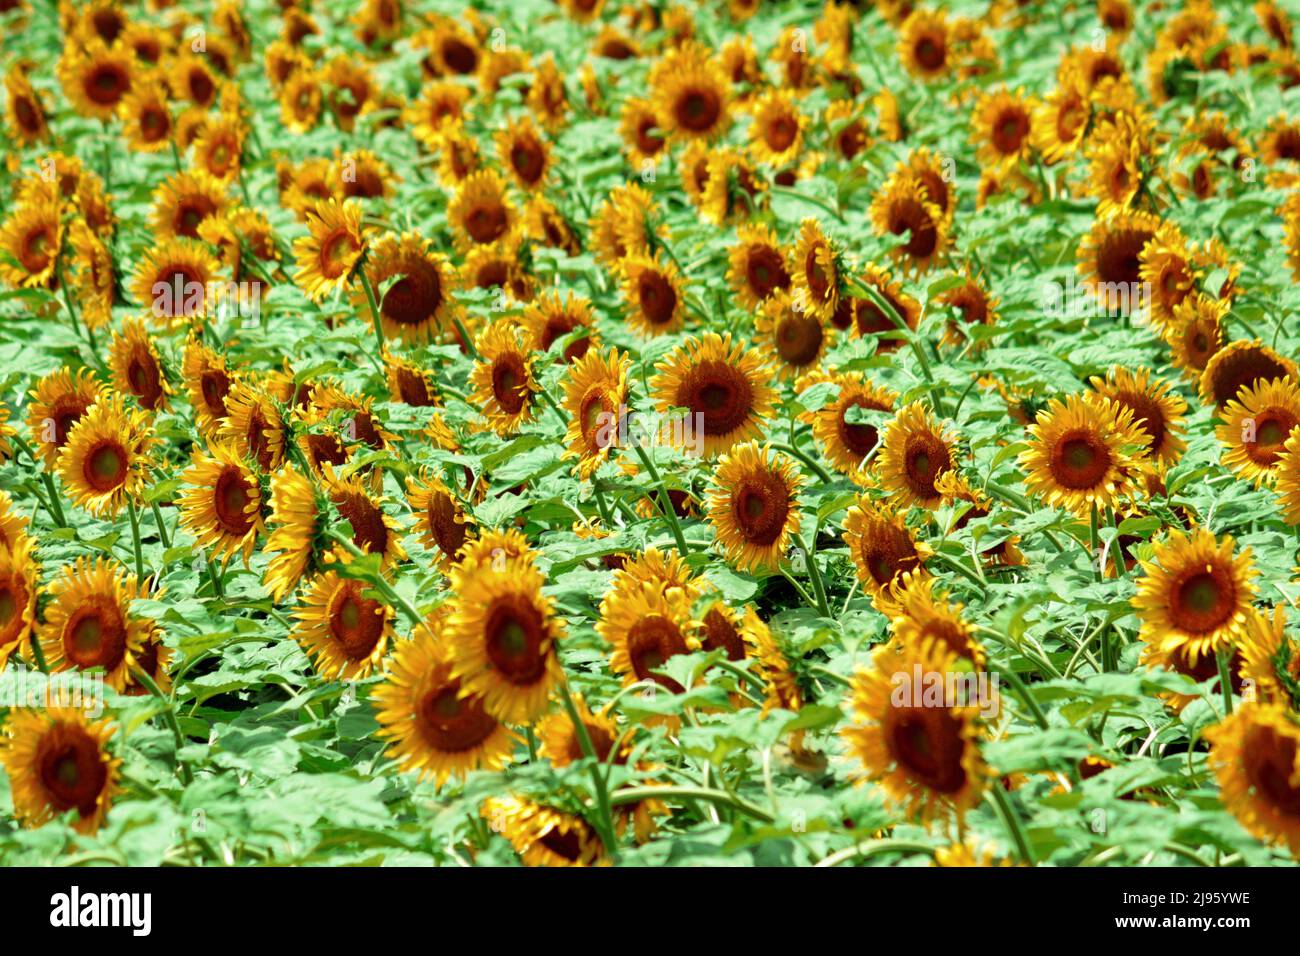 Many sunflowers swaying in the wind in the summer field Stock Photo